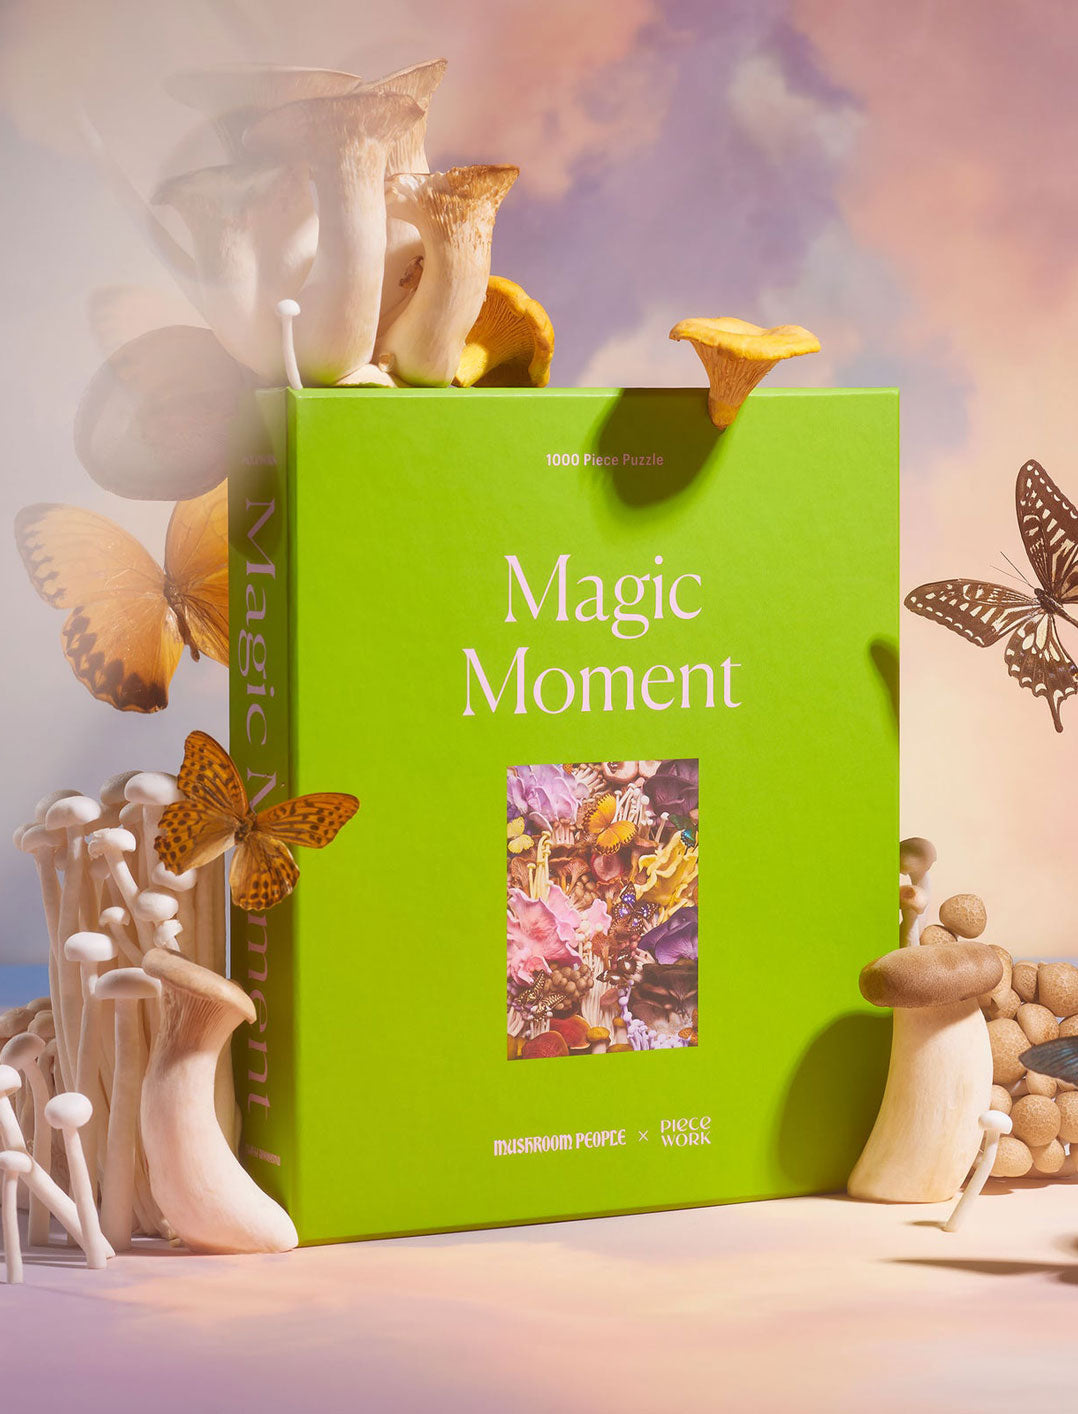 PIECEWORK Magic Moment 1000 Piece Puzzle available at Lahn.shop